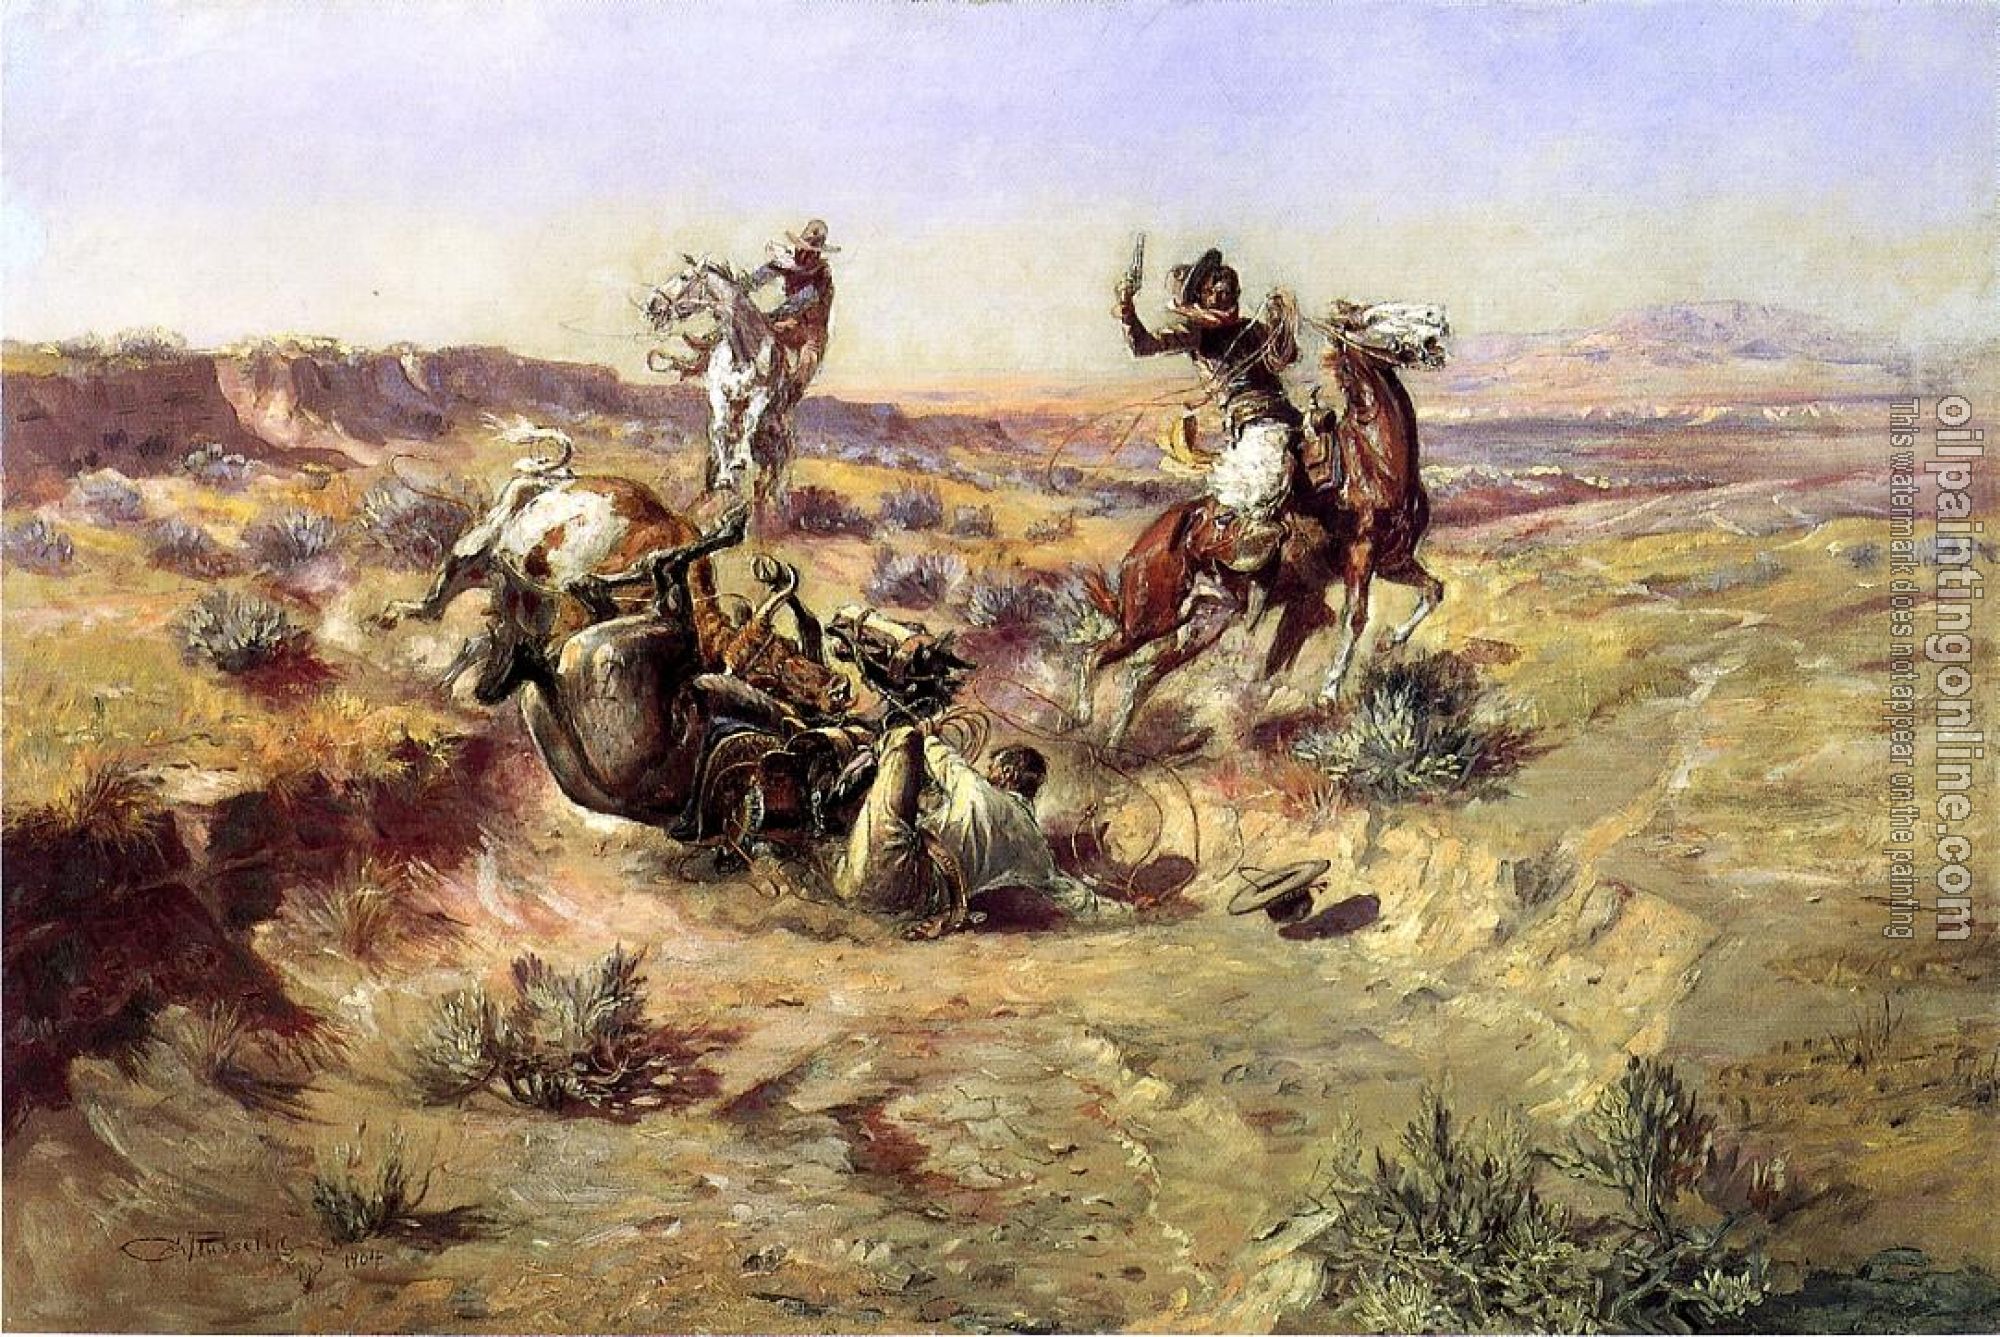 Charles Marion Russell - The Broken Rope